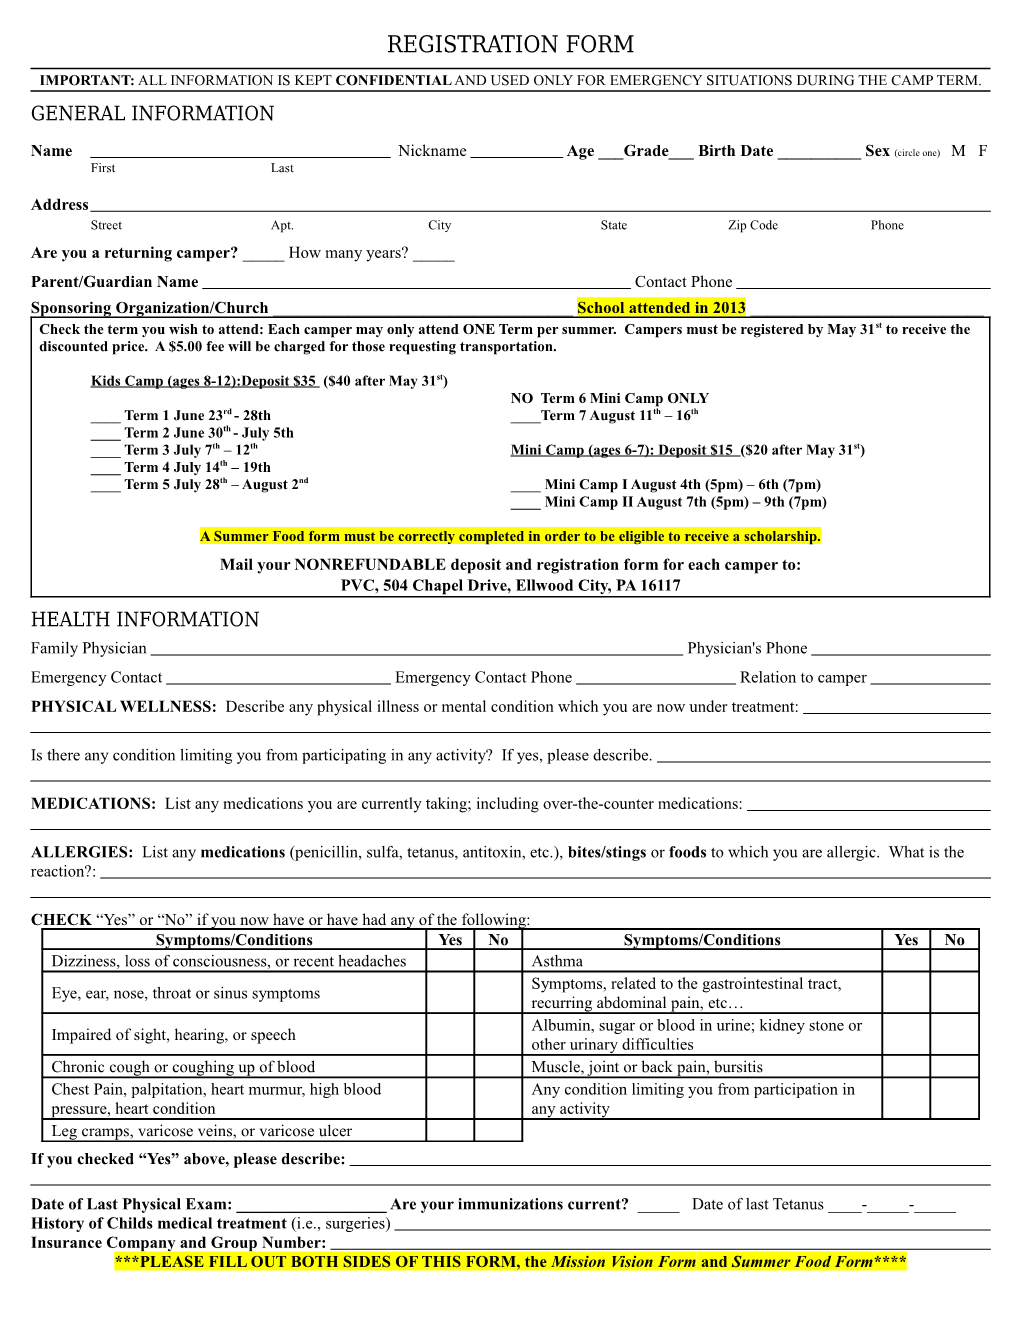 Confidential Registration and Medical Form